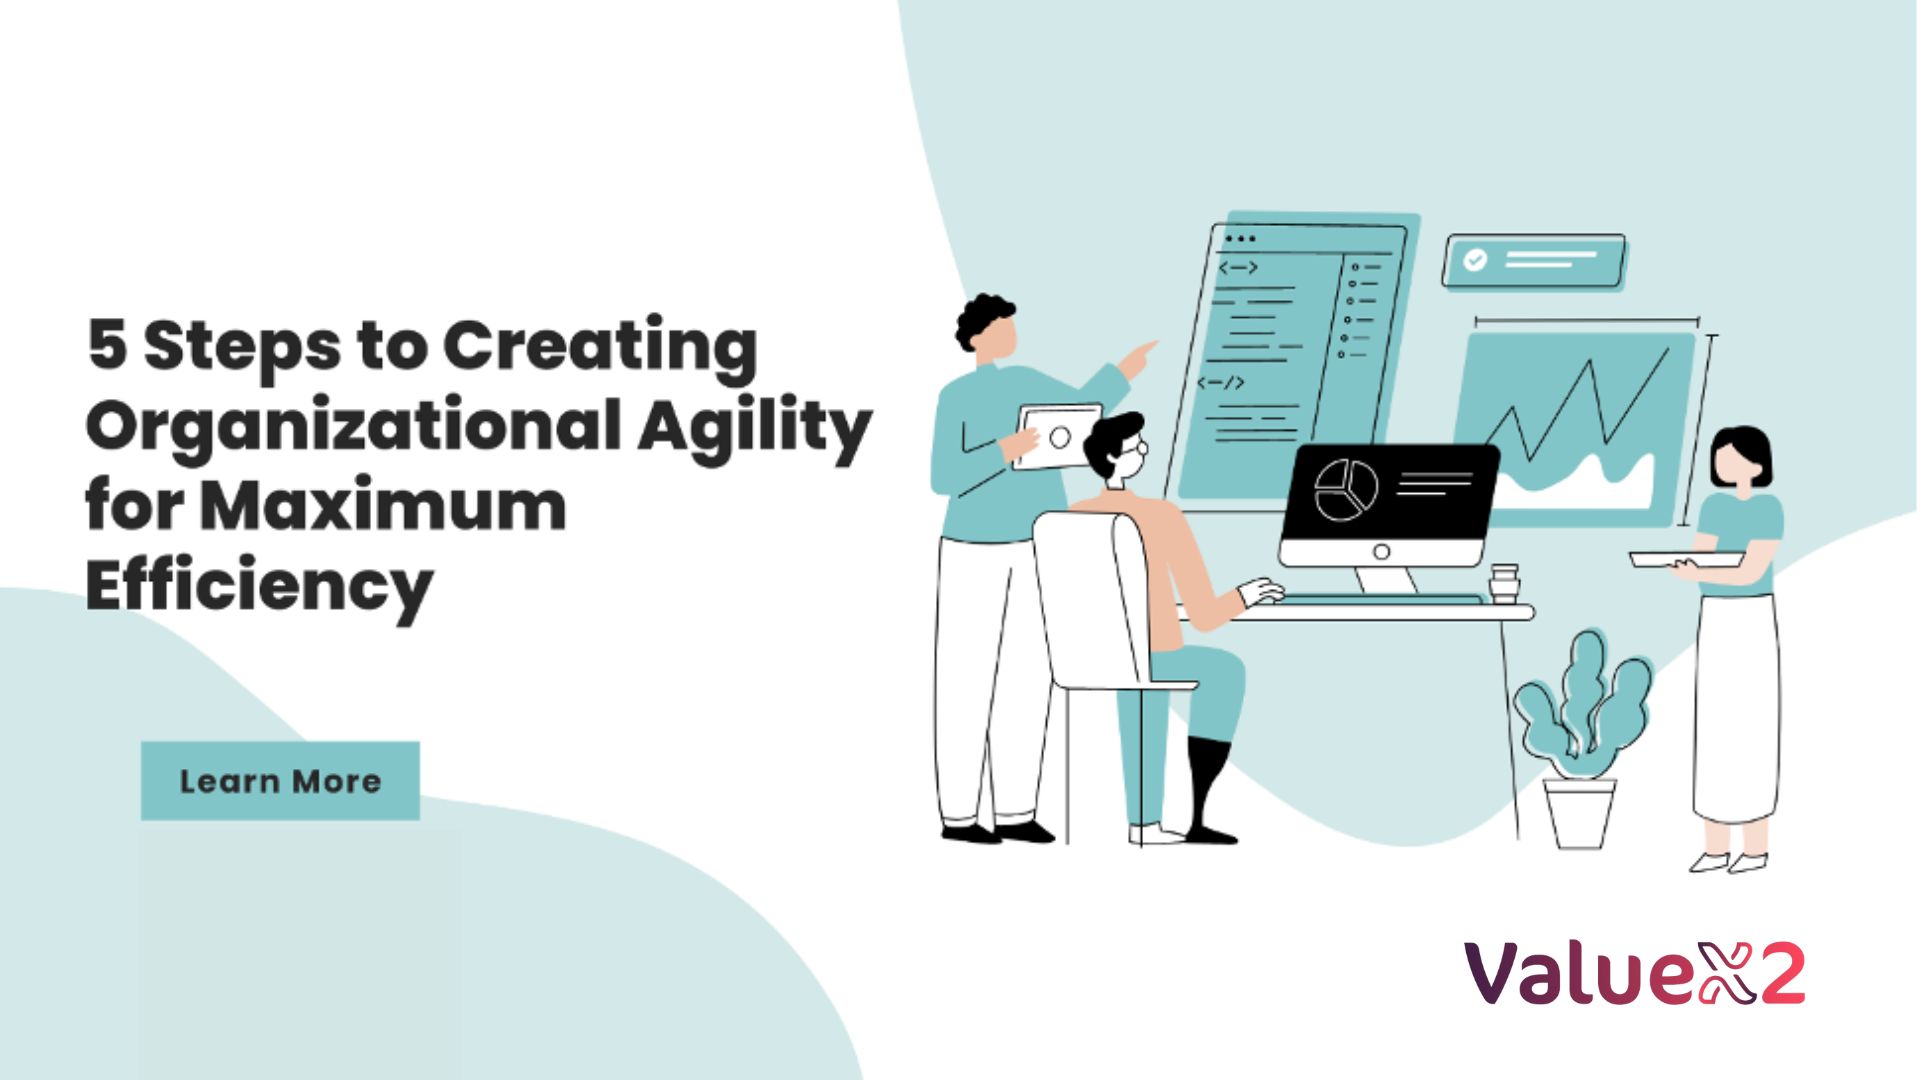 Steps to creating organizational agility for maximum efficiency